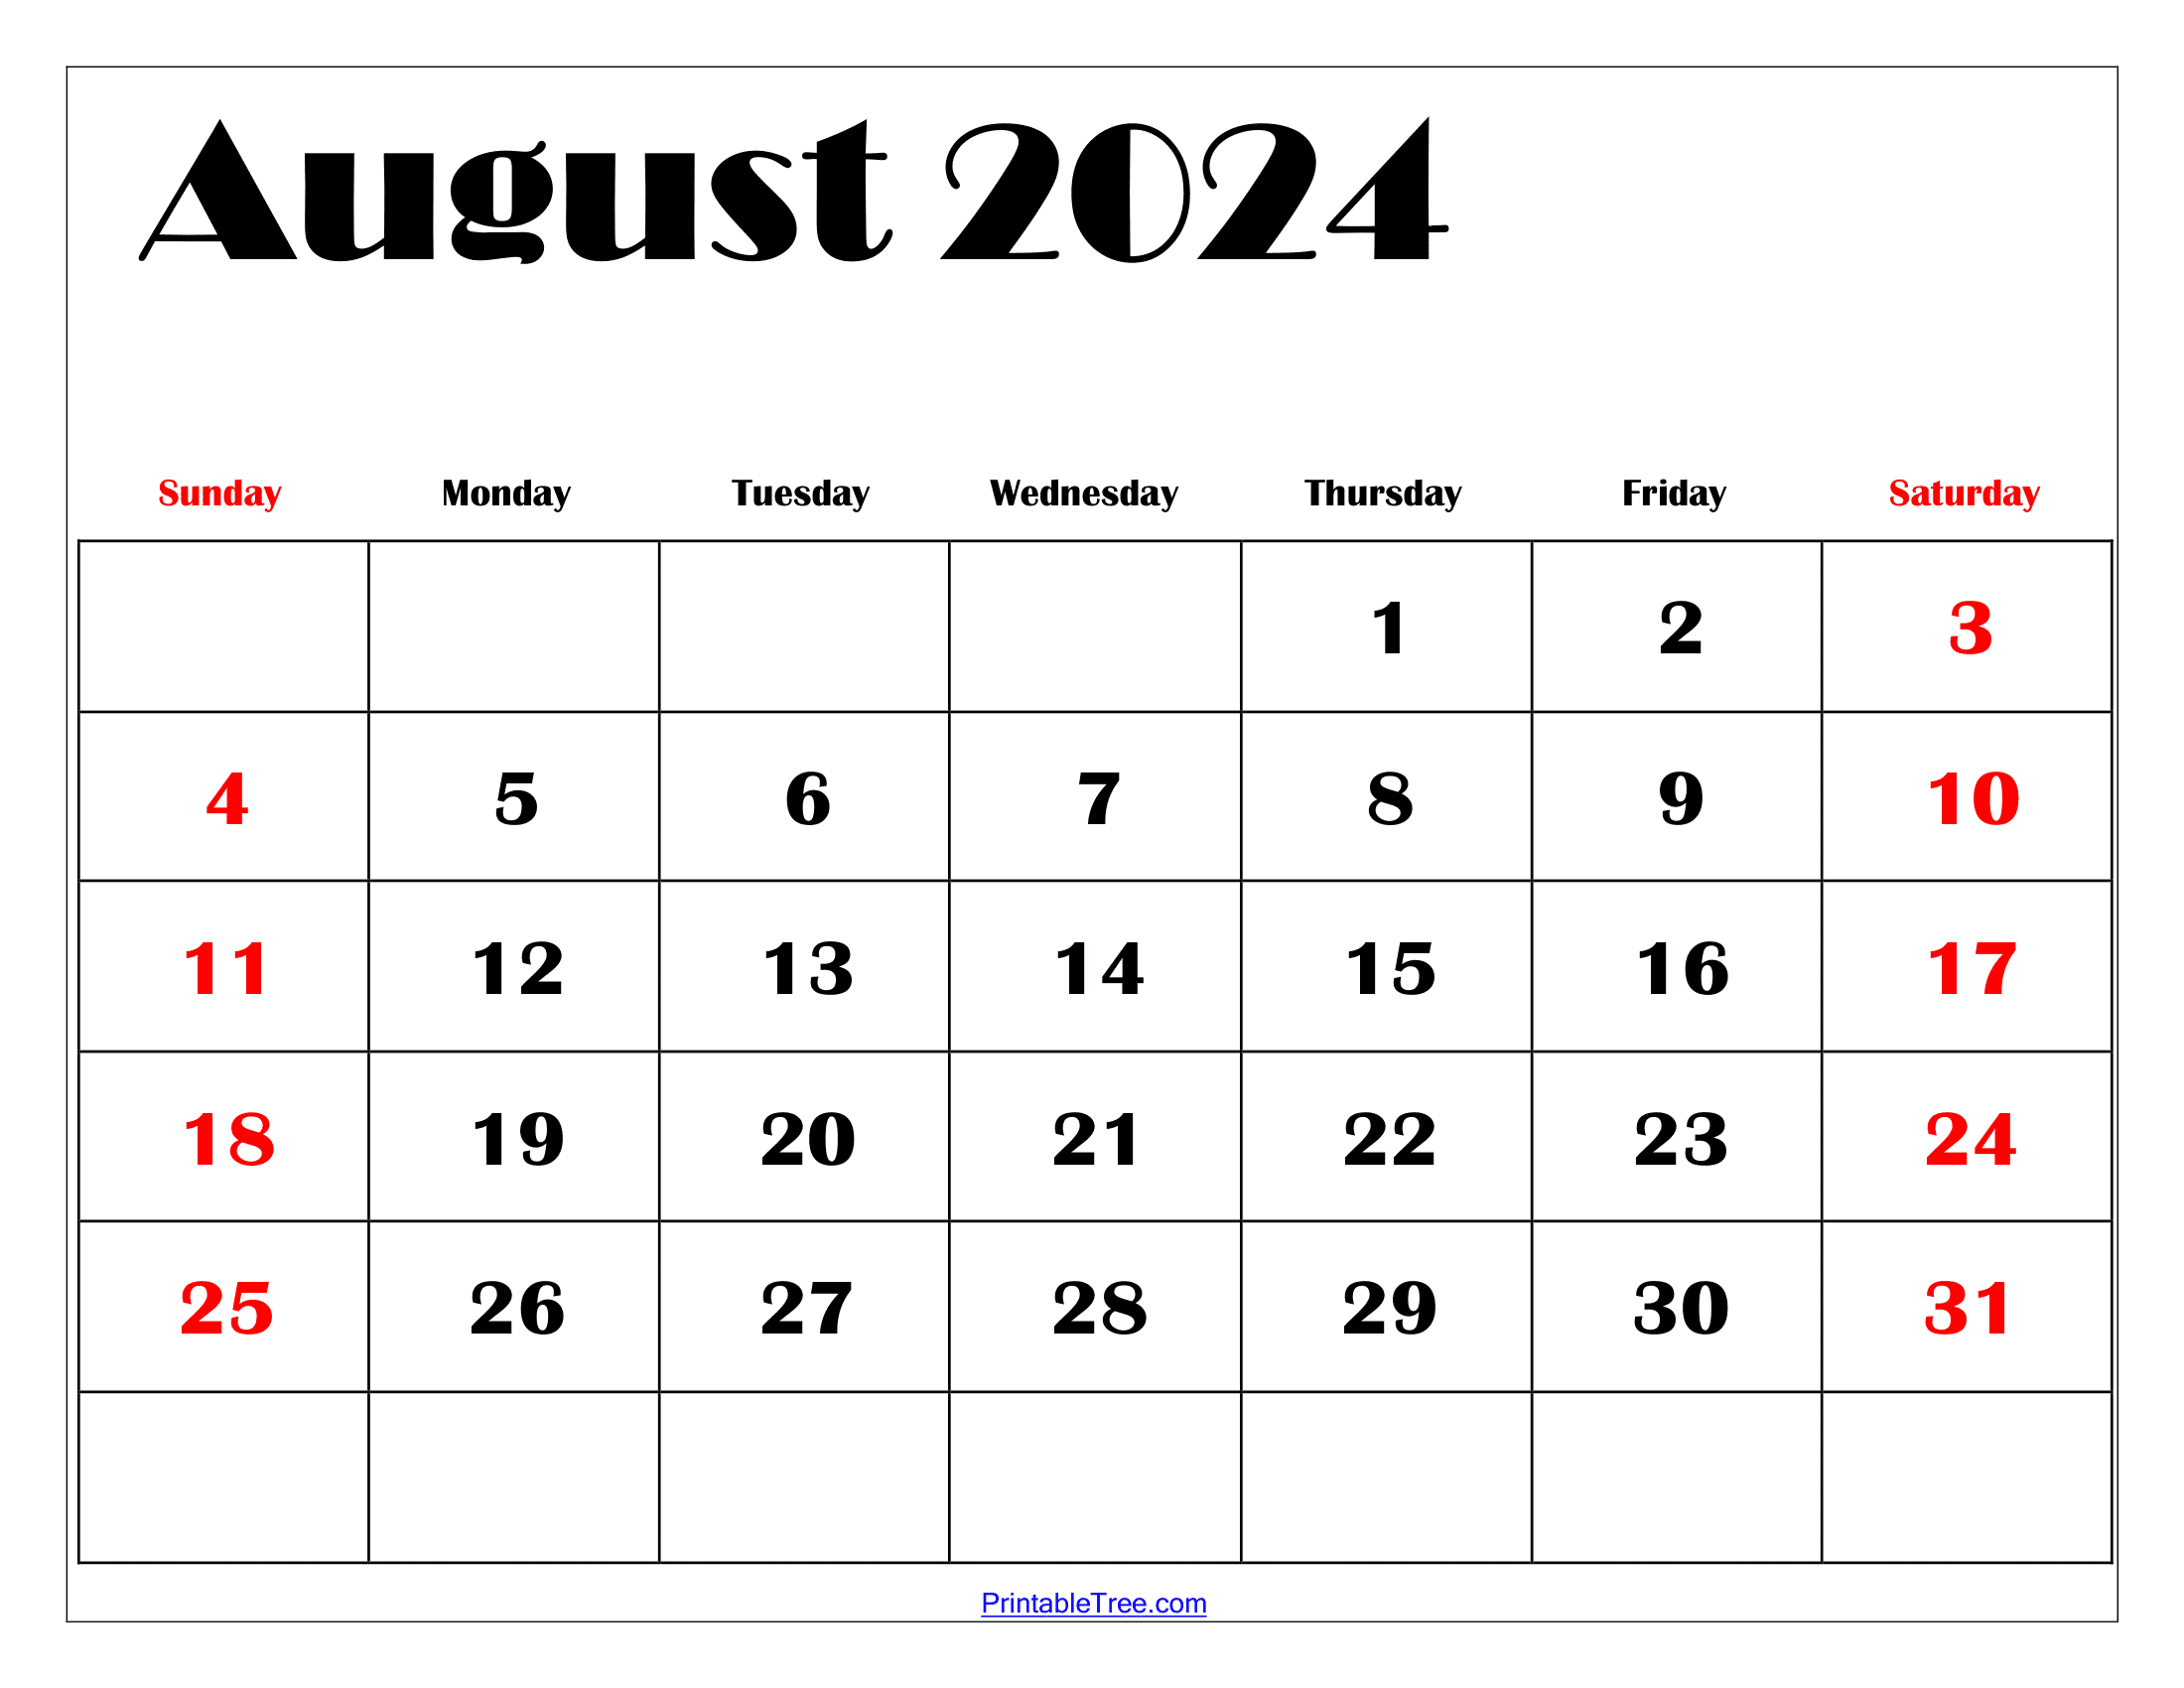 Free Printable August 2024 Calendar With Holidays Inge Regine - Free Printable 2024 Calendar August